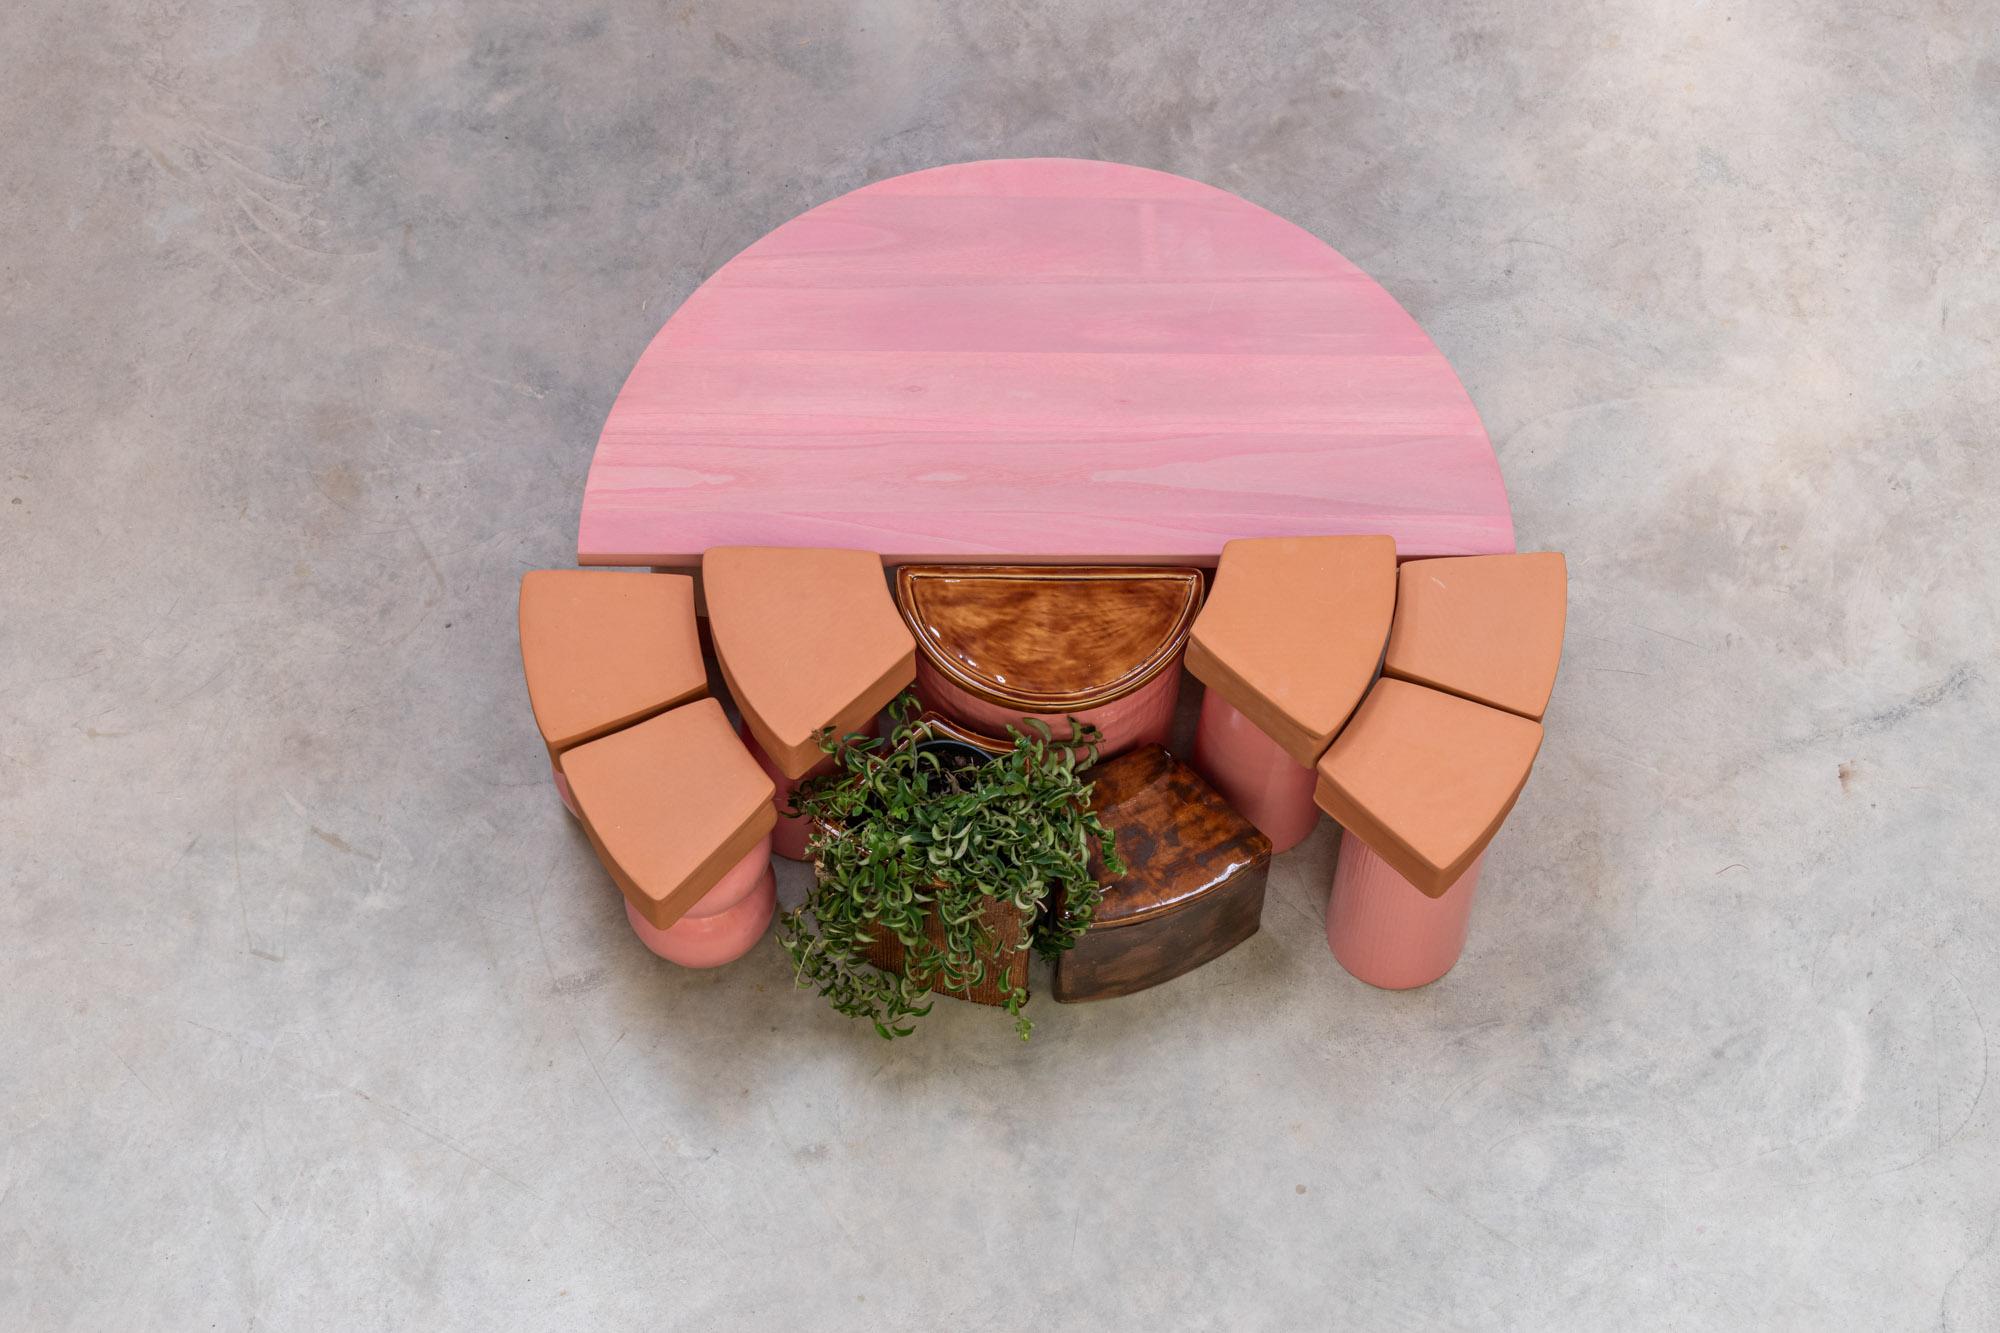 Get a load of this: the Ceramic Table is not your ordinary home decor piece. It's a wild and wacky work of art! We're talking ceramic, terracotta clay, and wood accents all mashed together in 16 bold objects that scream, 